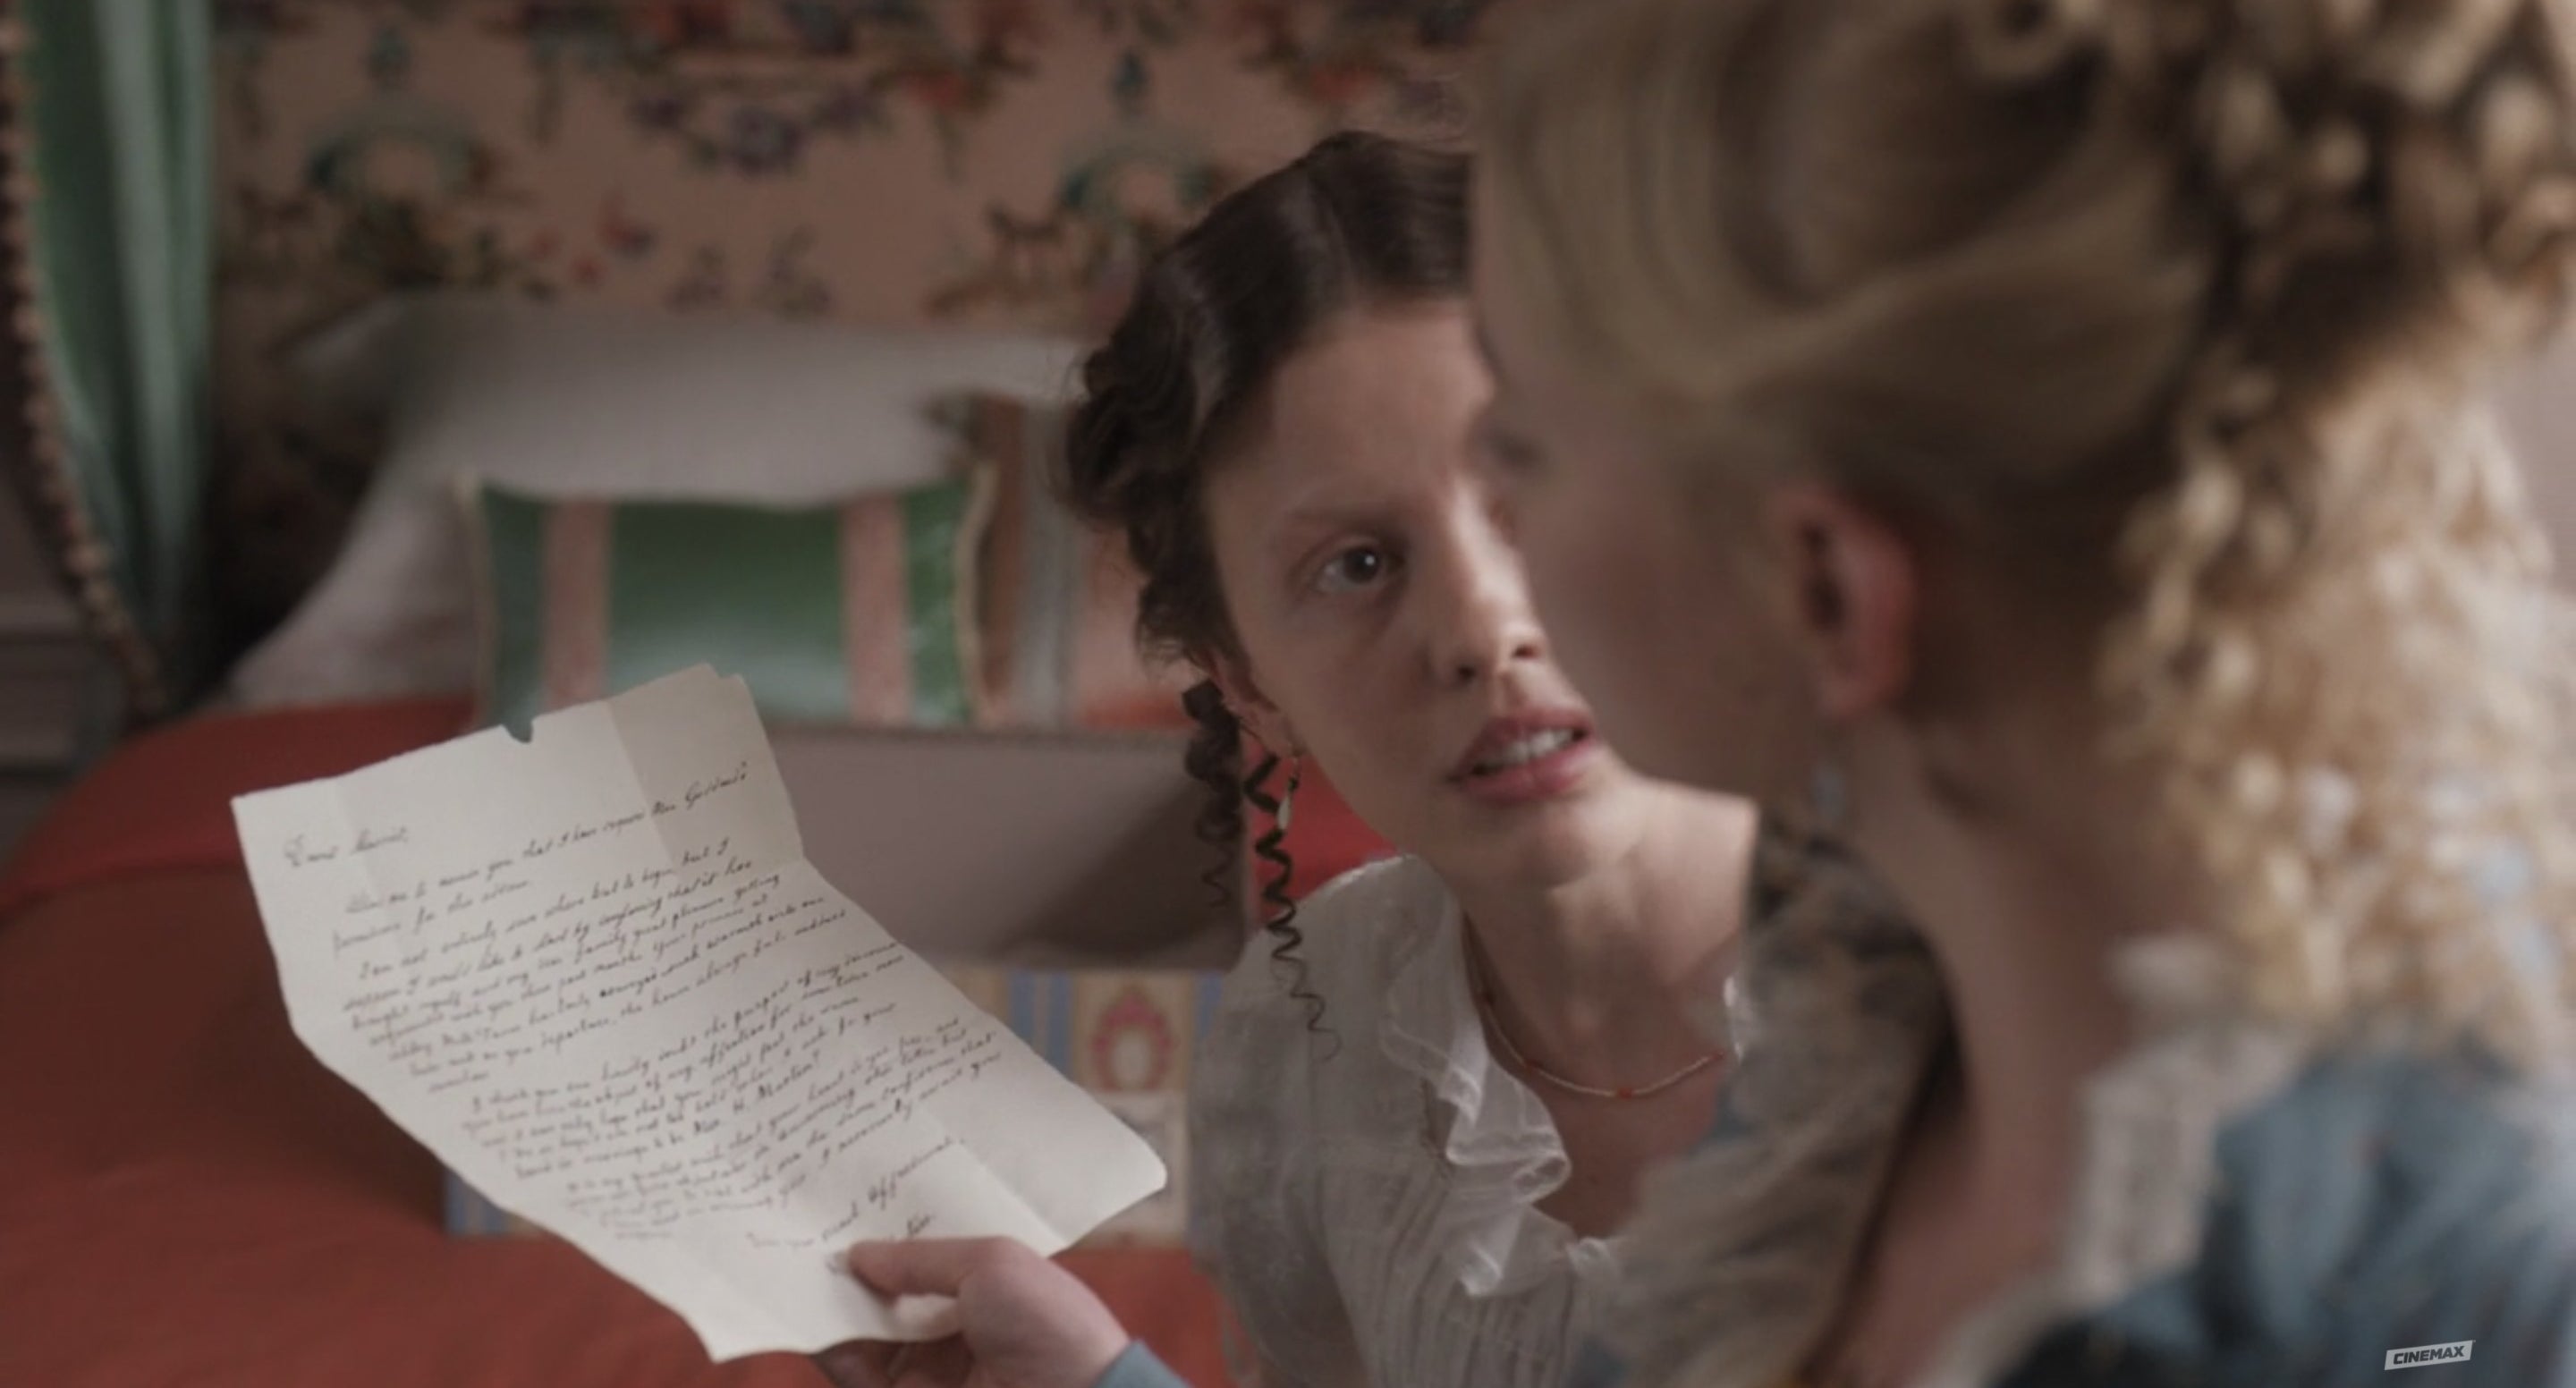 Emma reads a letter with Harriet beside her